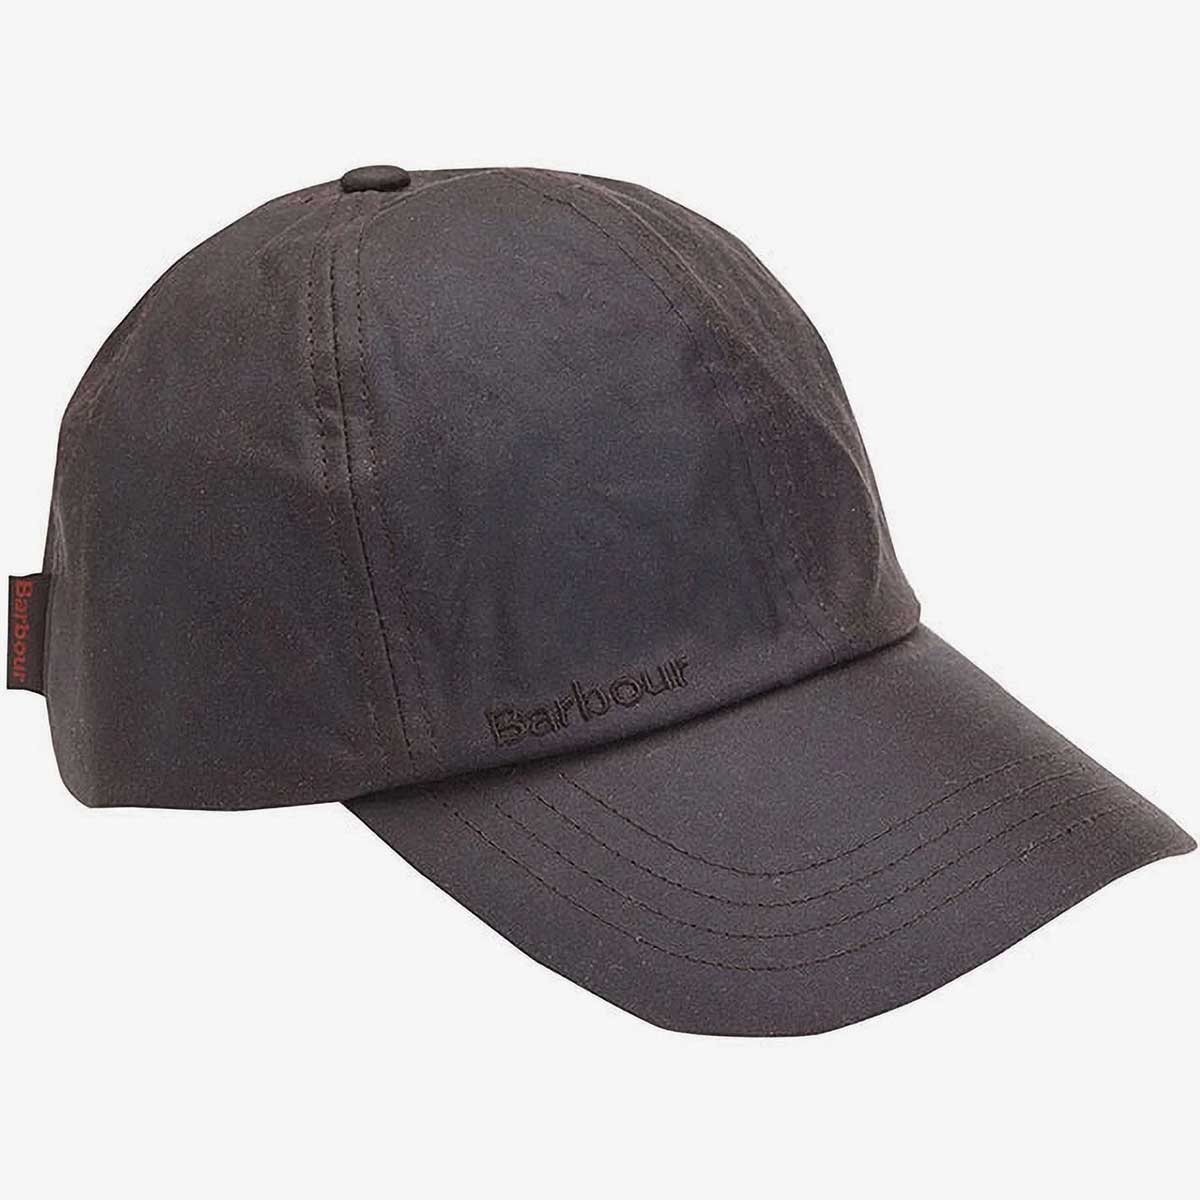 BARBOUR Waxed Sports Cap - Rustic